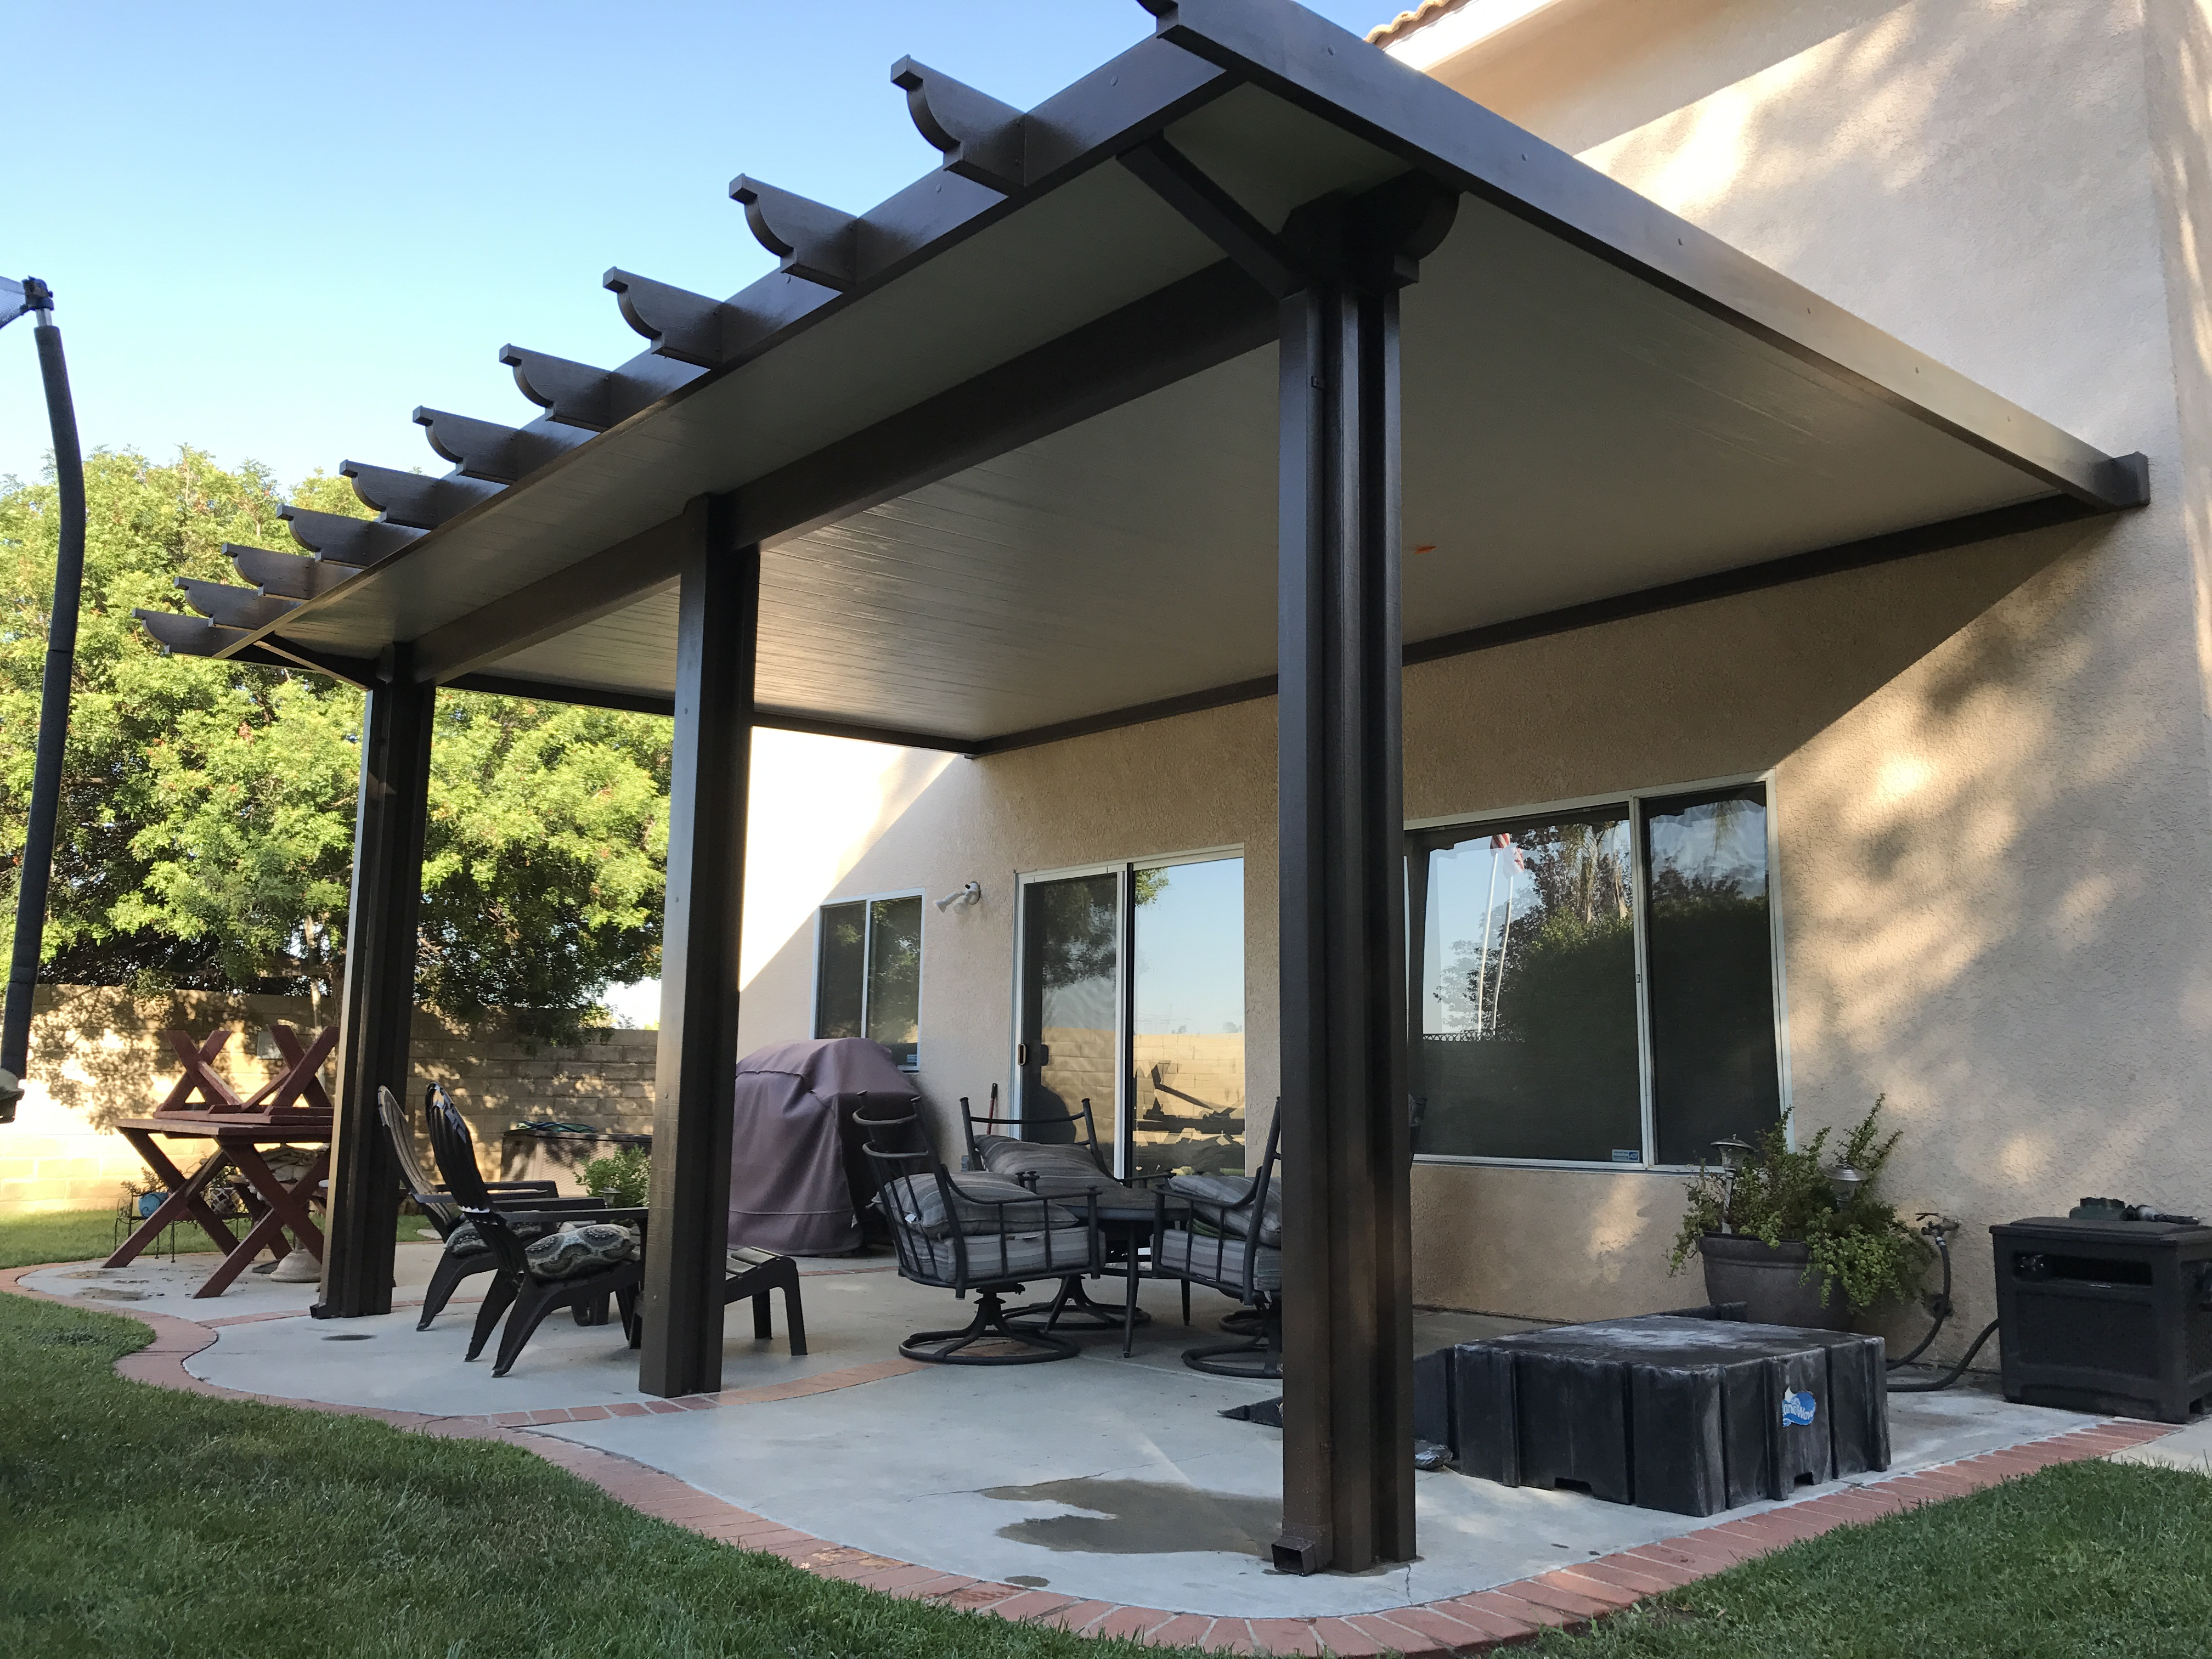 Alumawood Insulated Roofed Patio Cover Patiocovered pertaining to dimensions 4032 X 3024